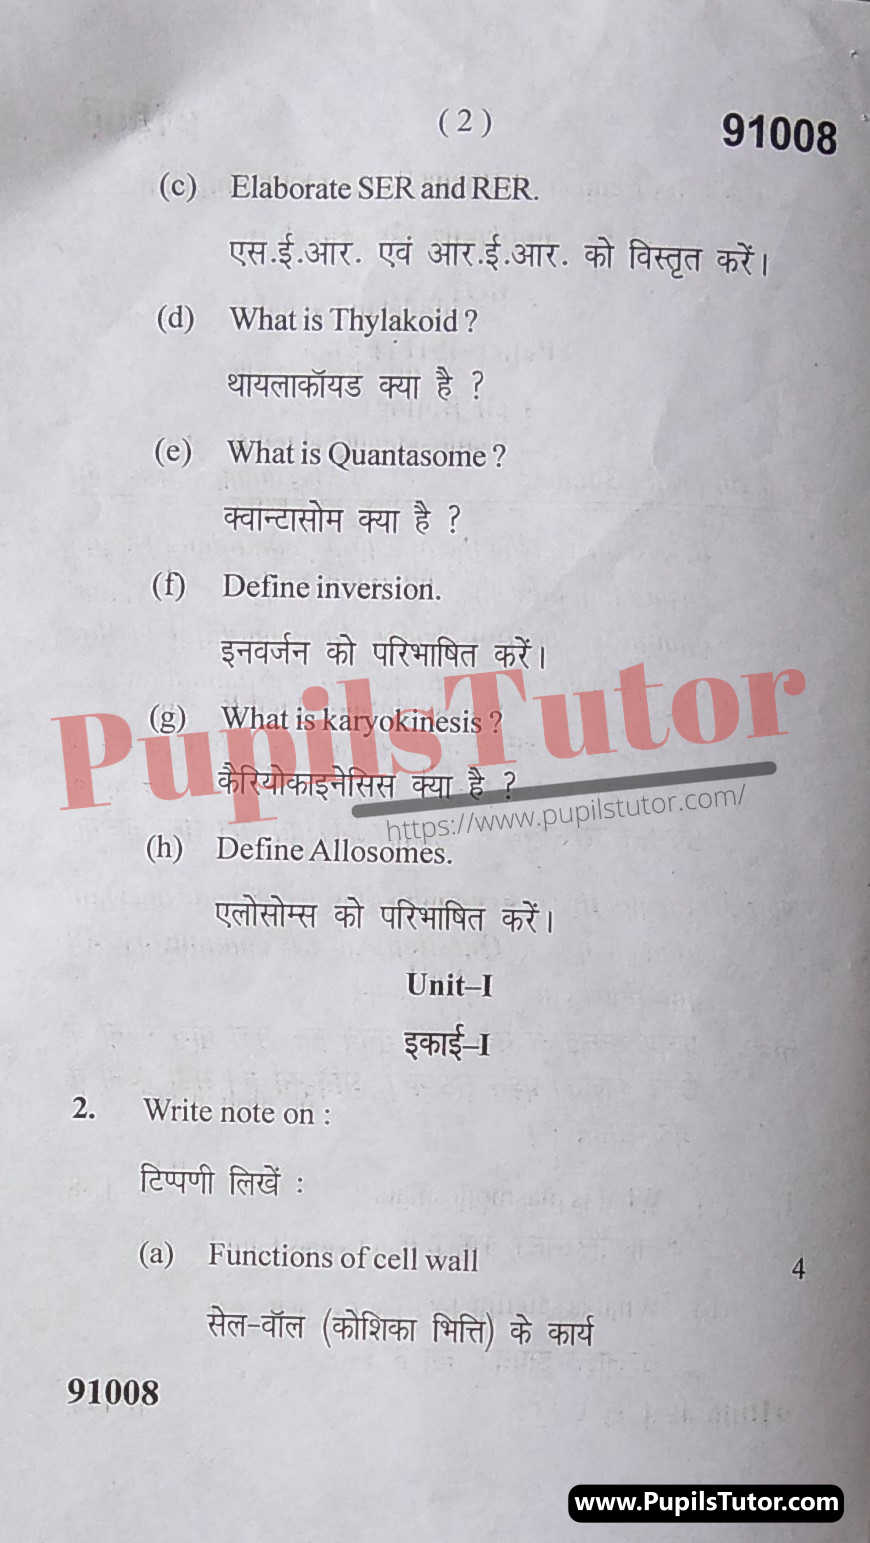 M.D. University B.Sc. [Botany] Cell Biology First Semester Important Question Answer And Solution - www.pupilstutor.com (Paper Page Number 2)